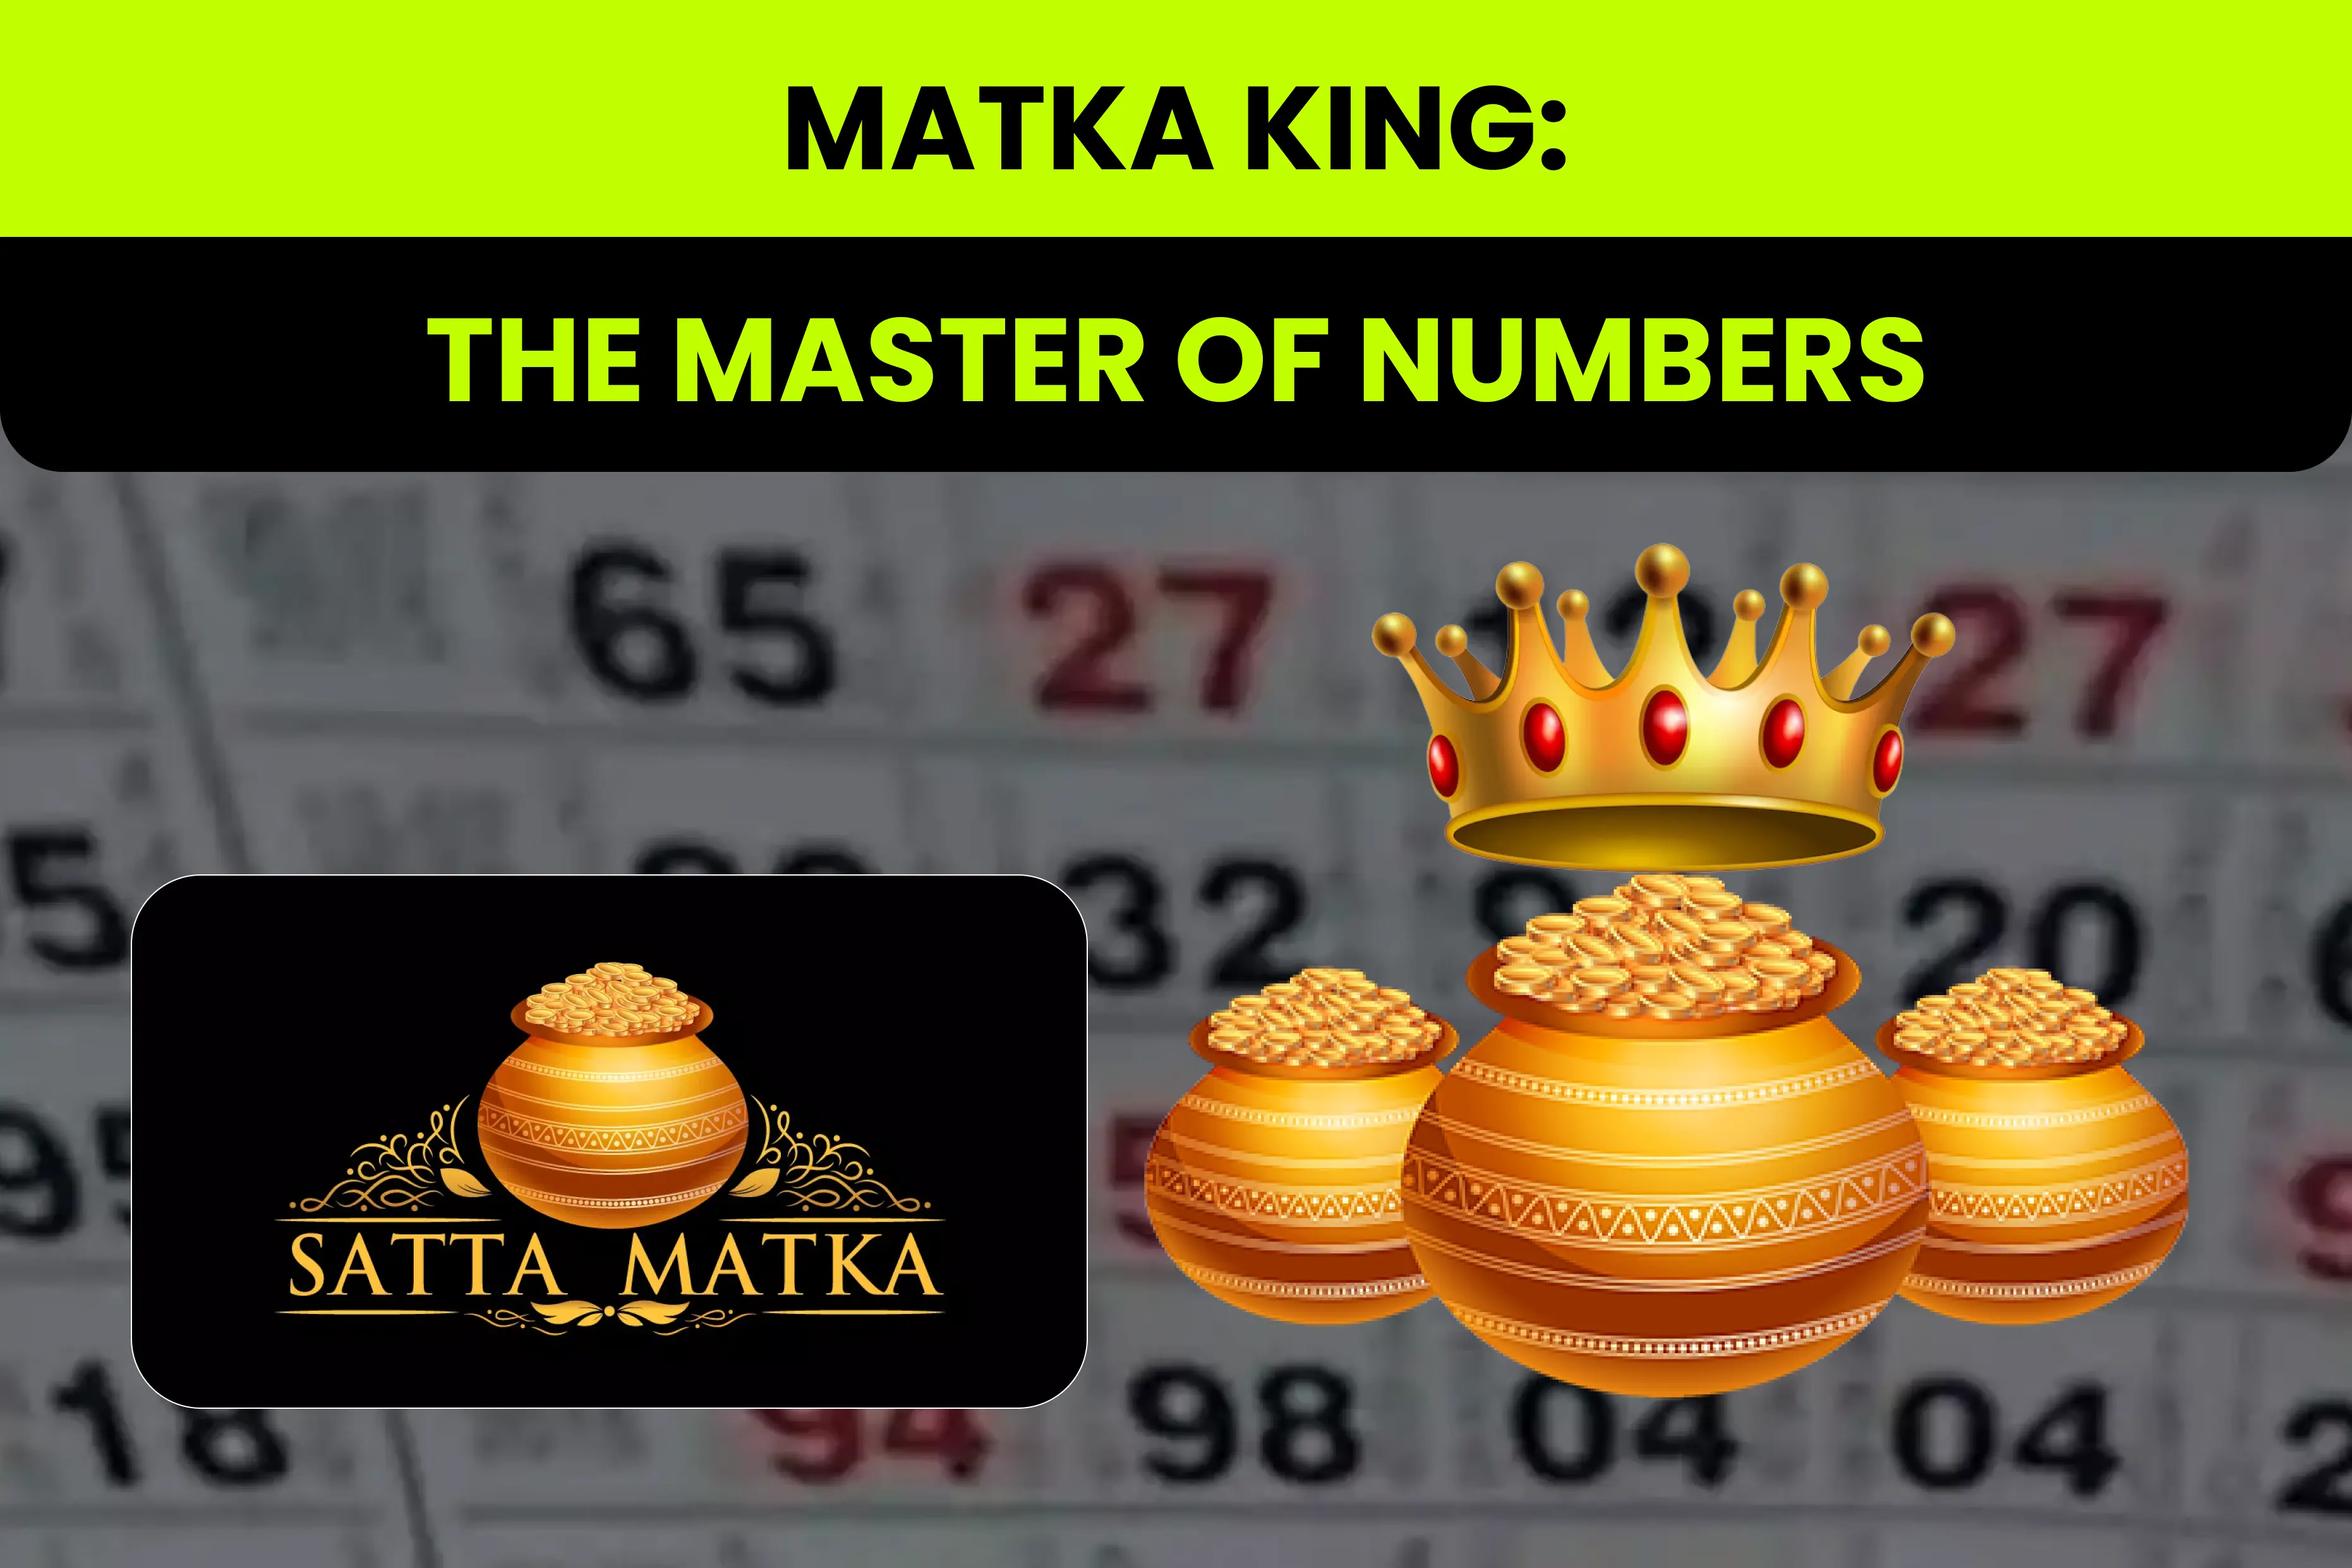 Matka King: The Master of Numbers